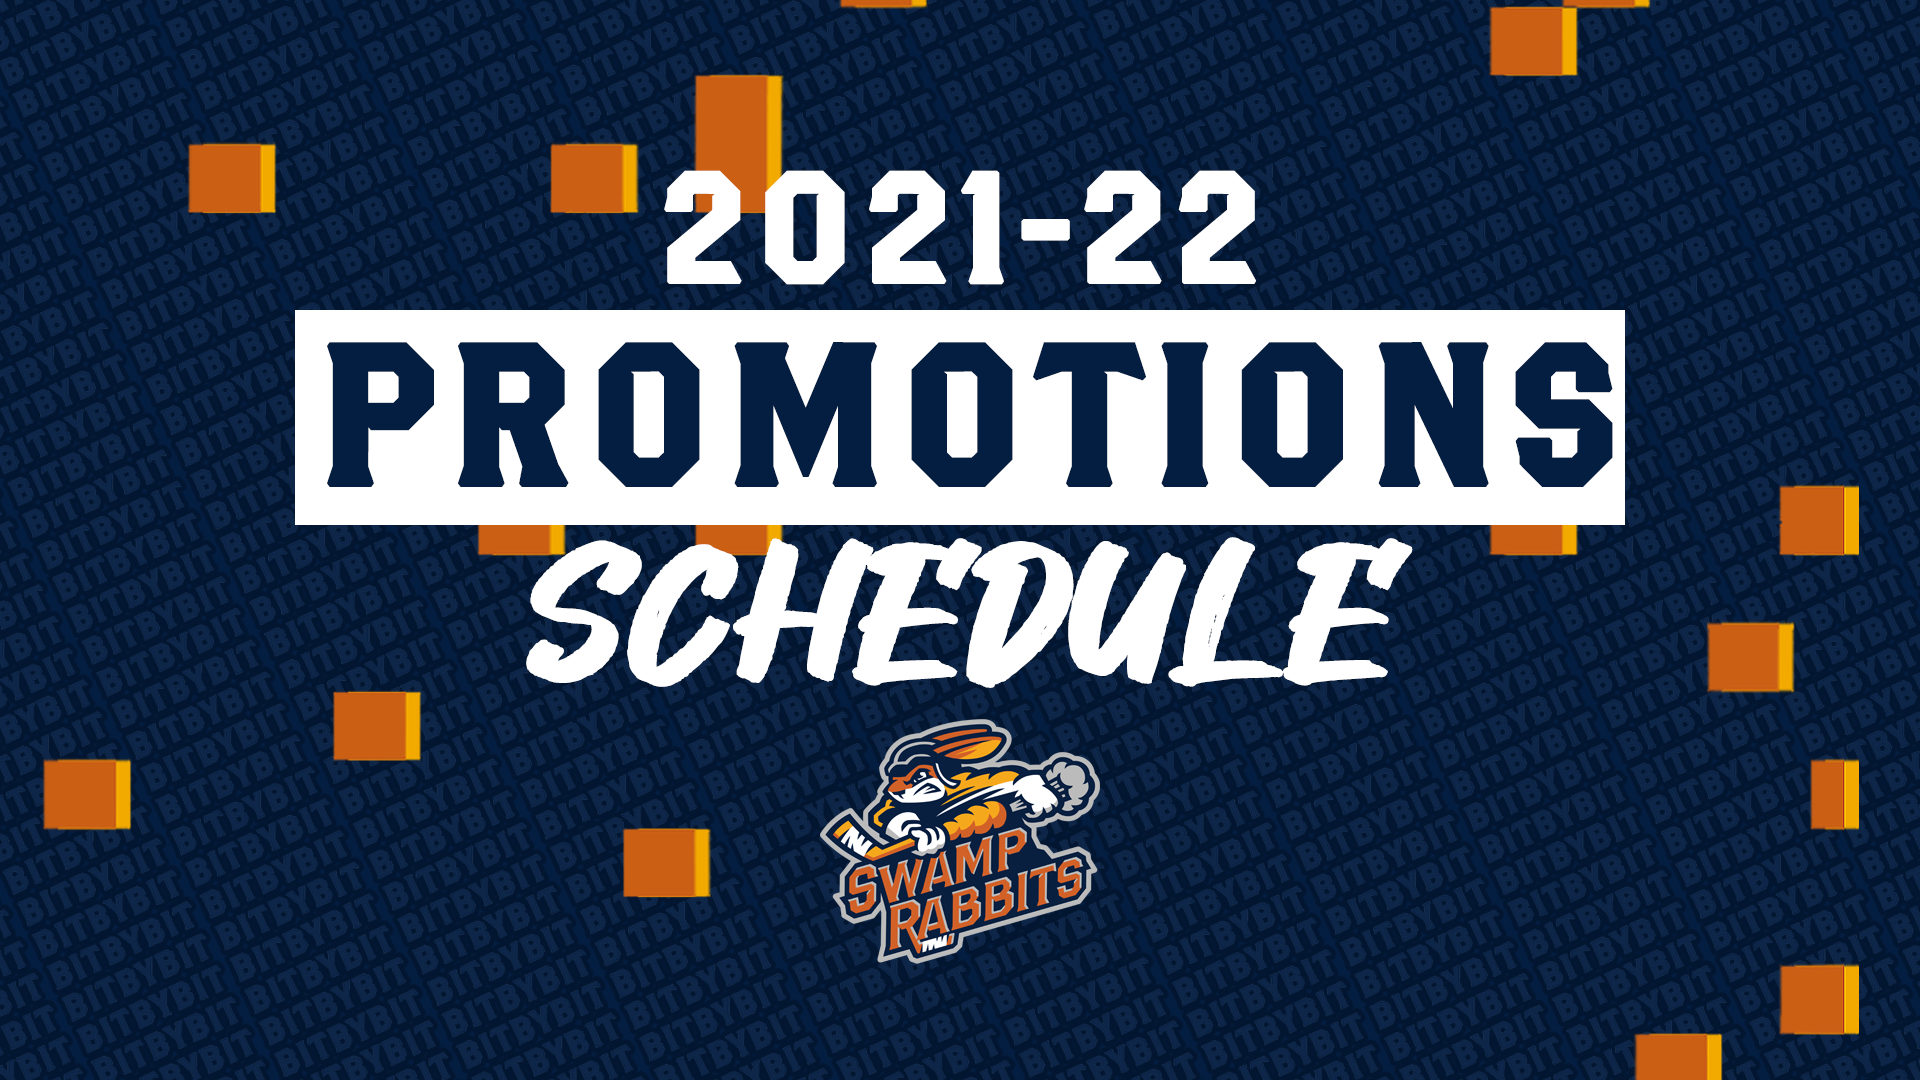 TRUST SWAMP RABBITS PROMOTIONS SCHEDULE Howlings